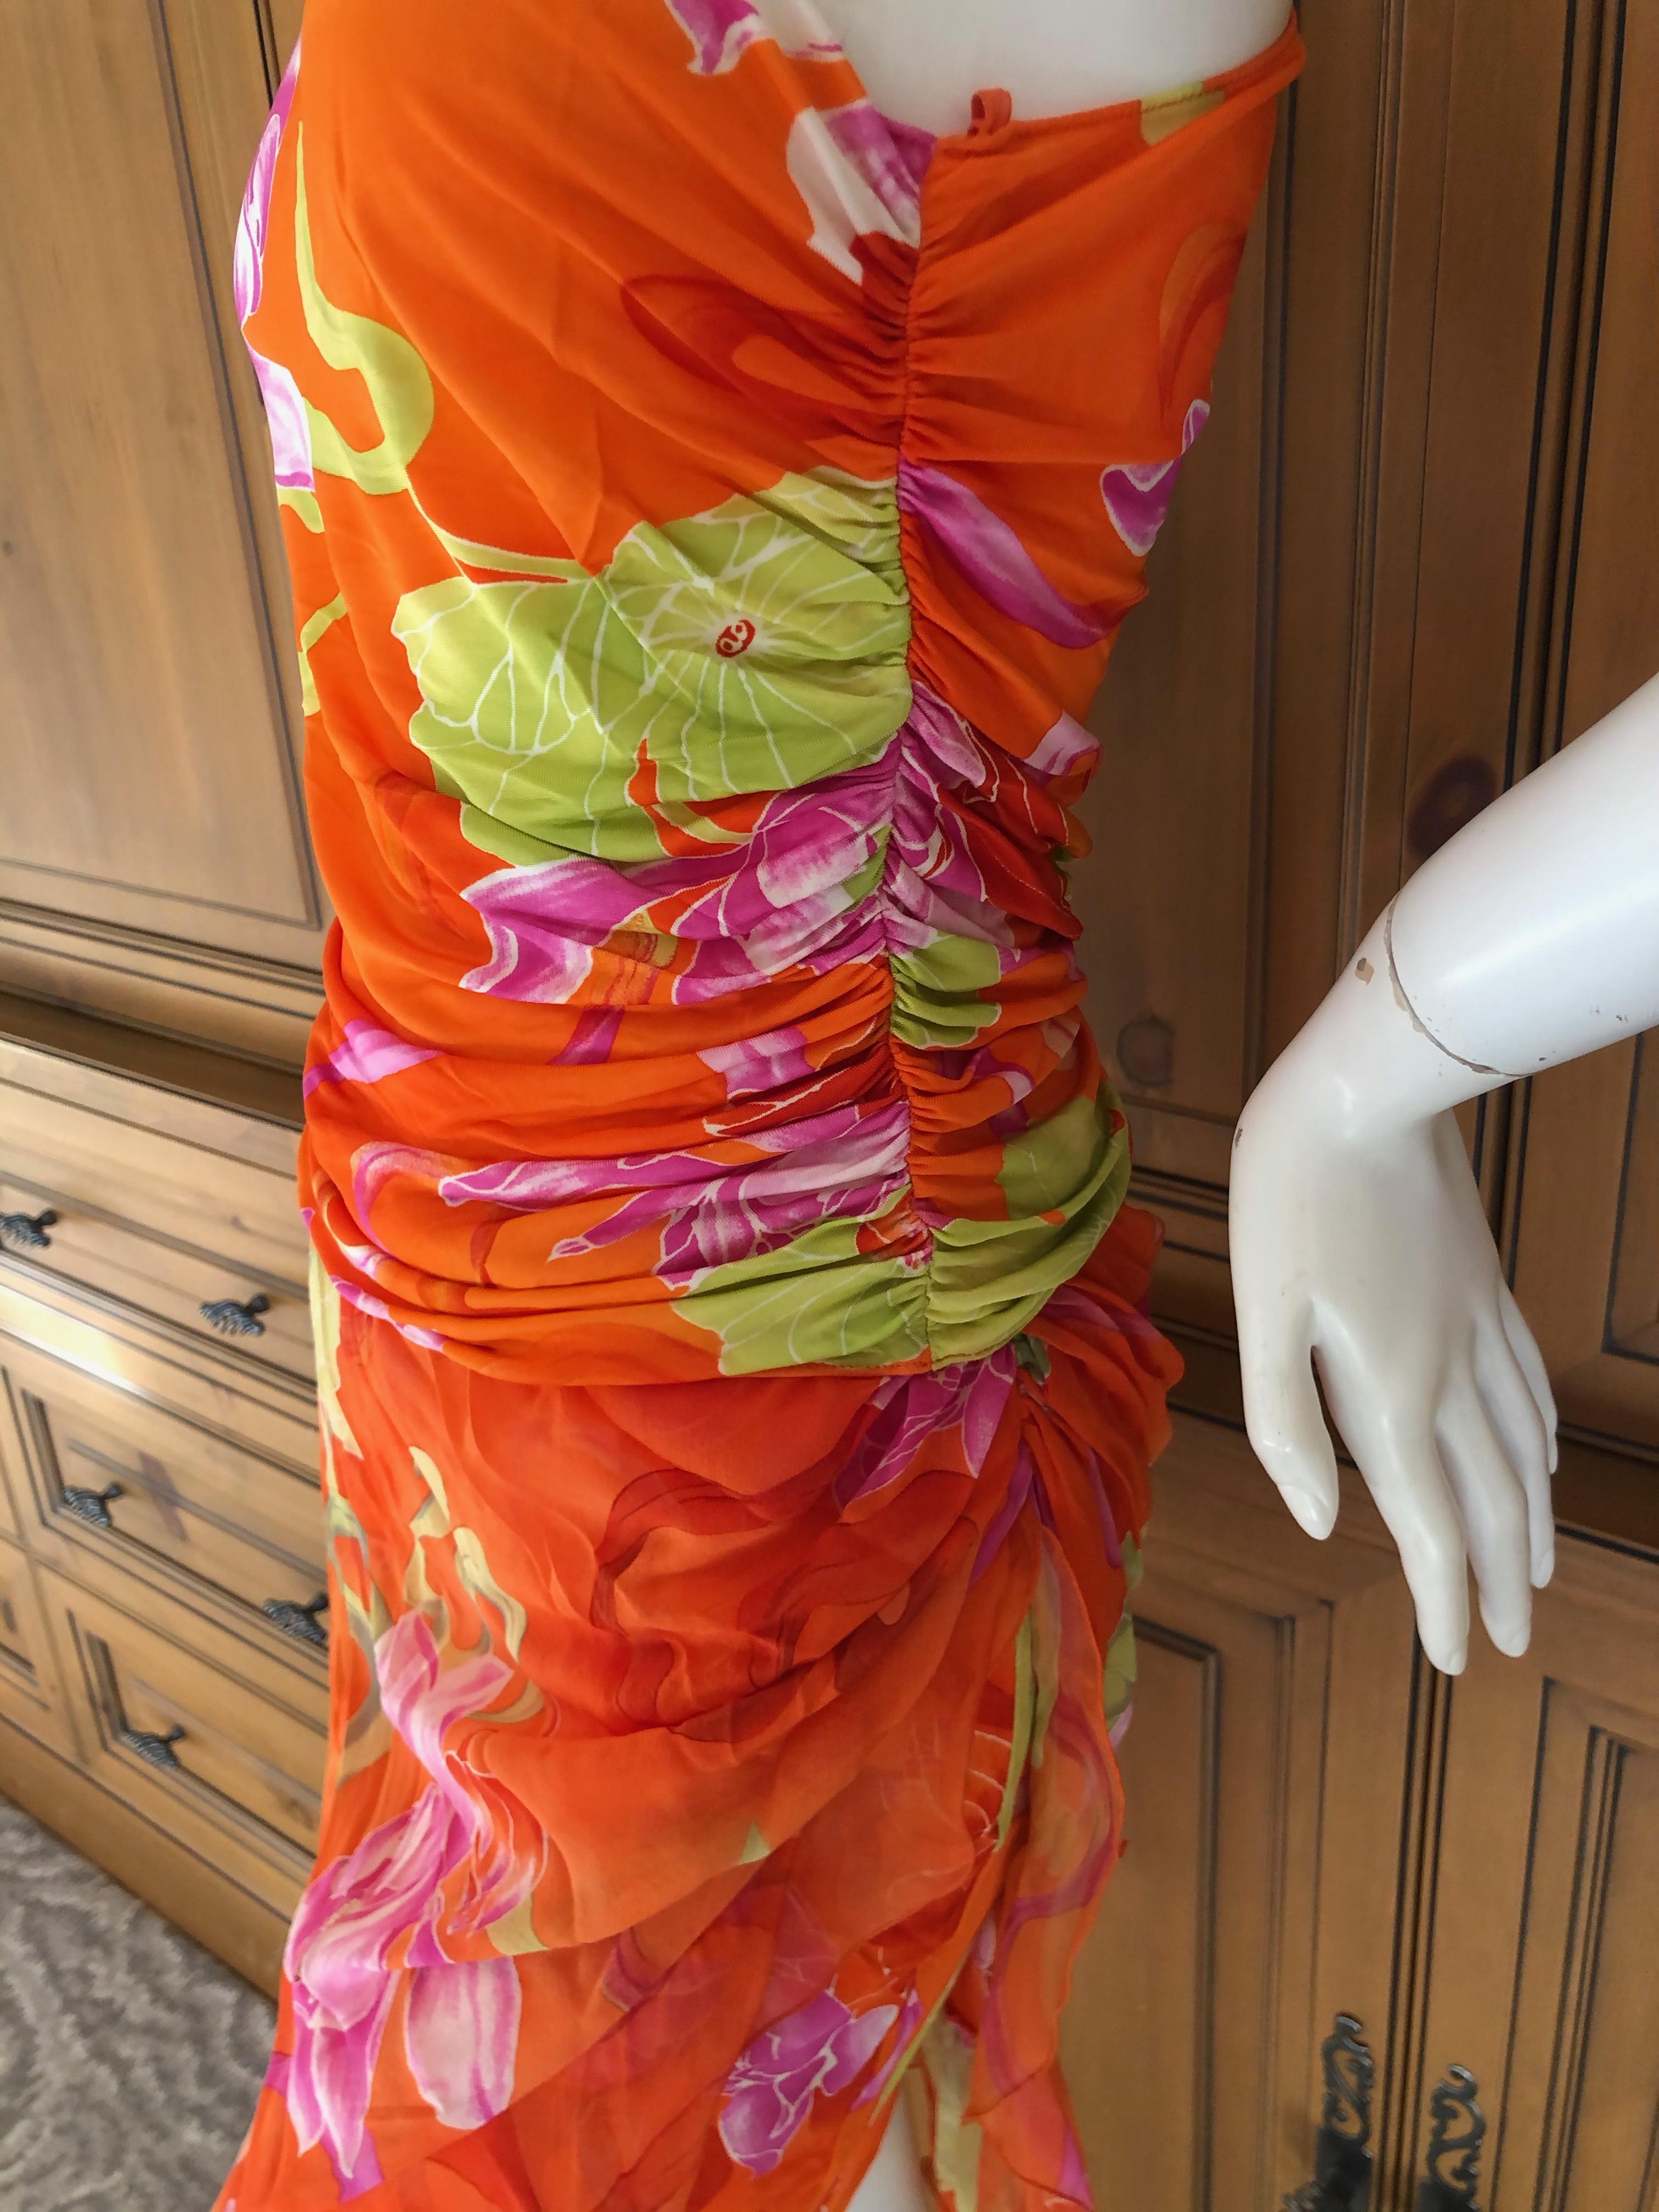 Emanuel Ungaro 3 Piece Silk Floral One Shoulder Dress w Shawl by Peter Dundas In Excellent Condition For Sale In Cloverdale, CA